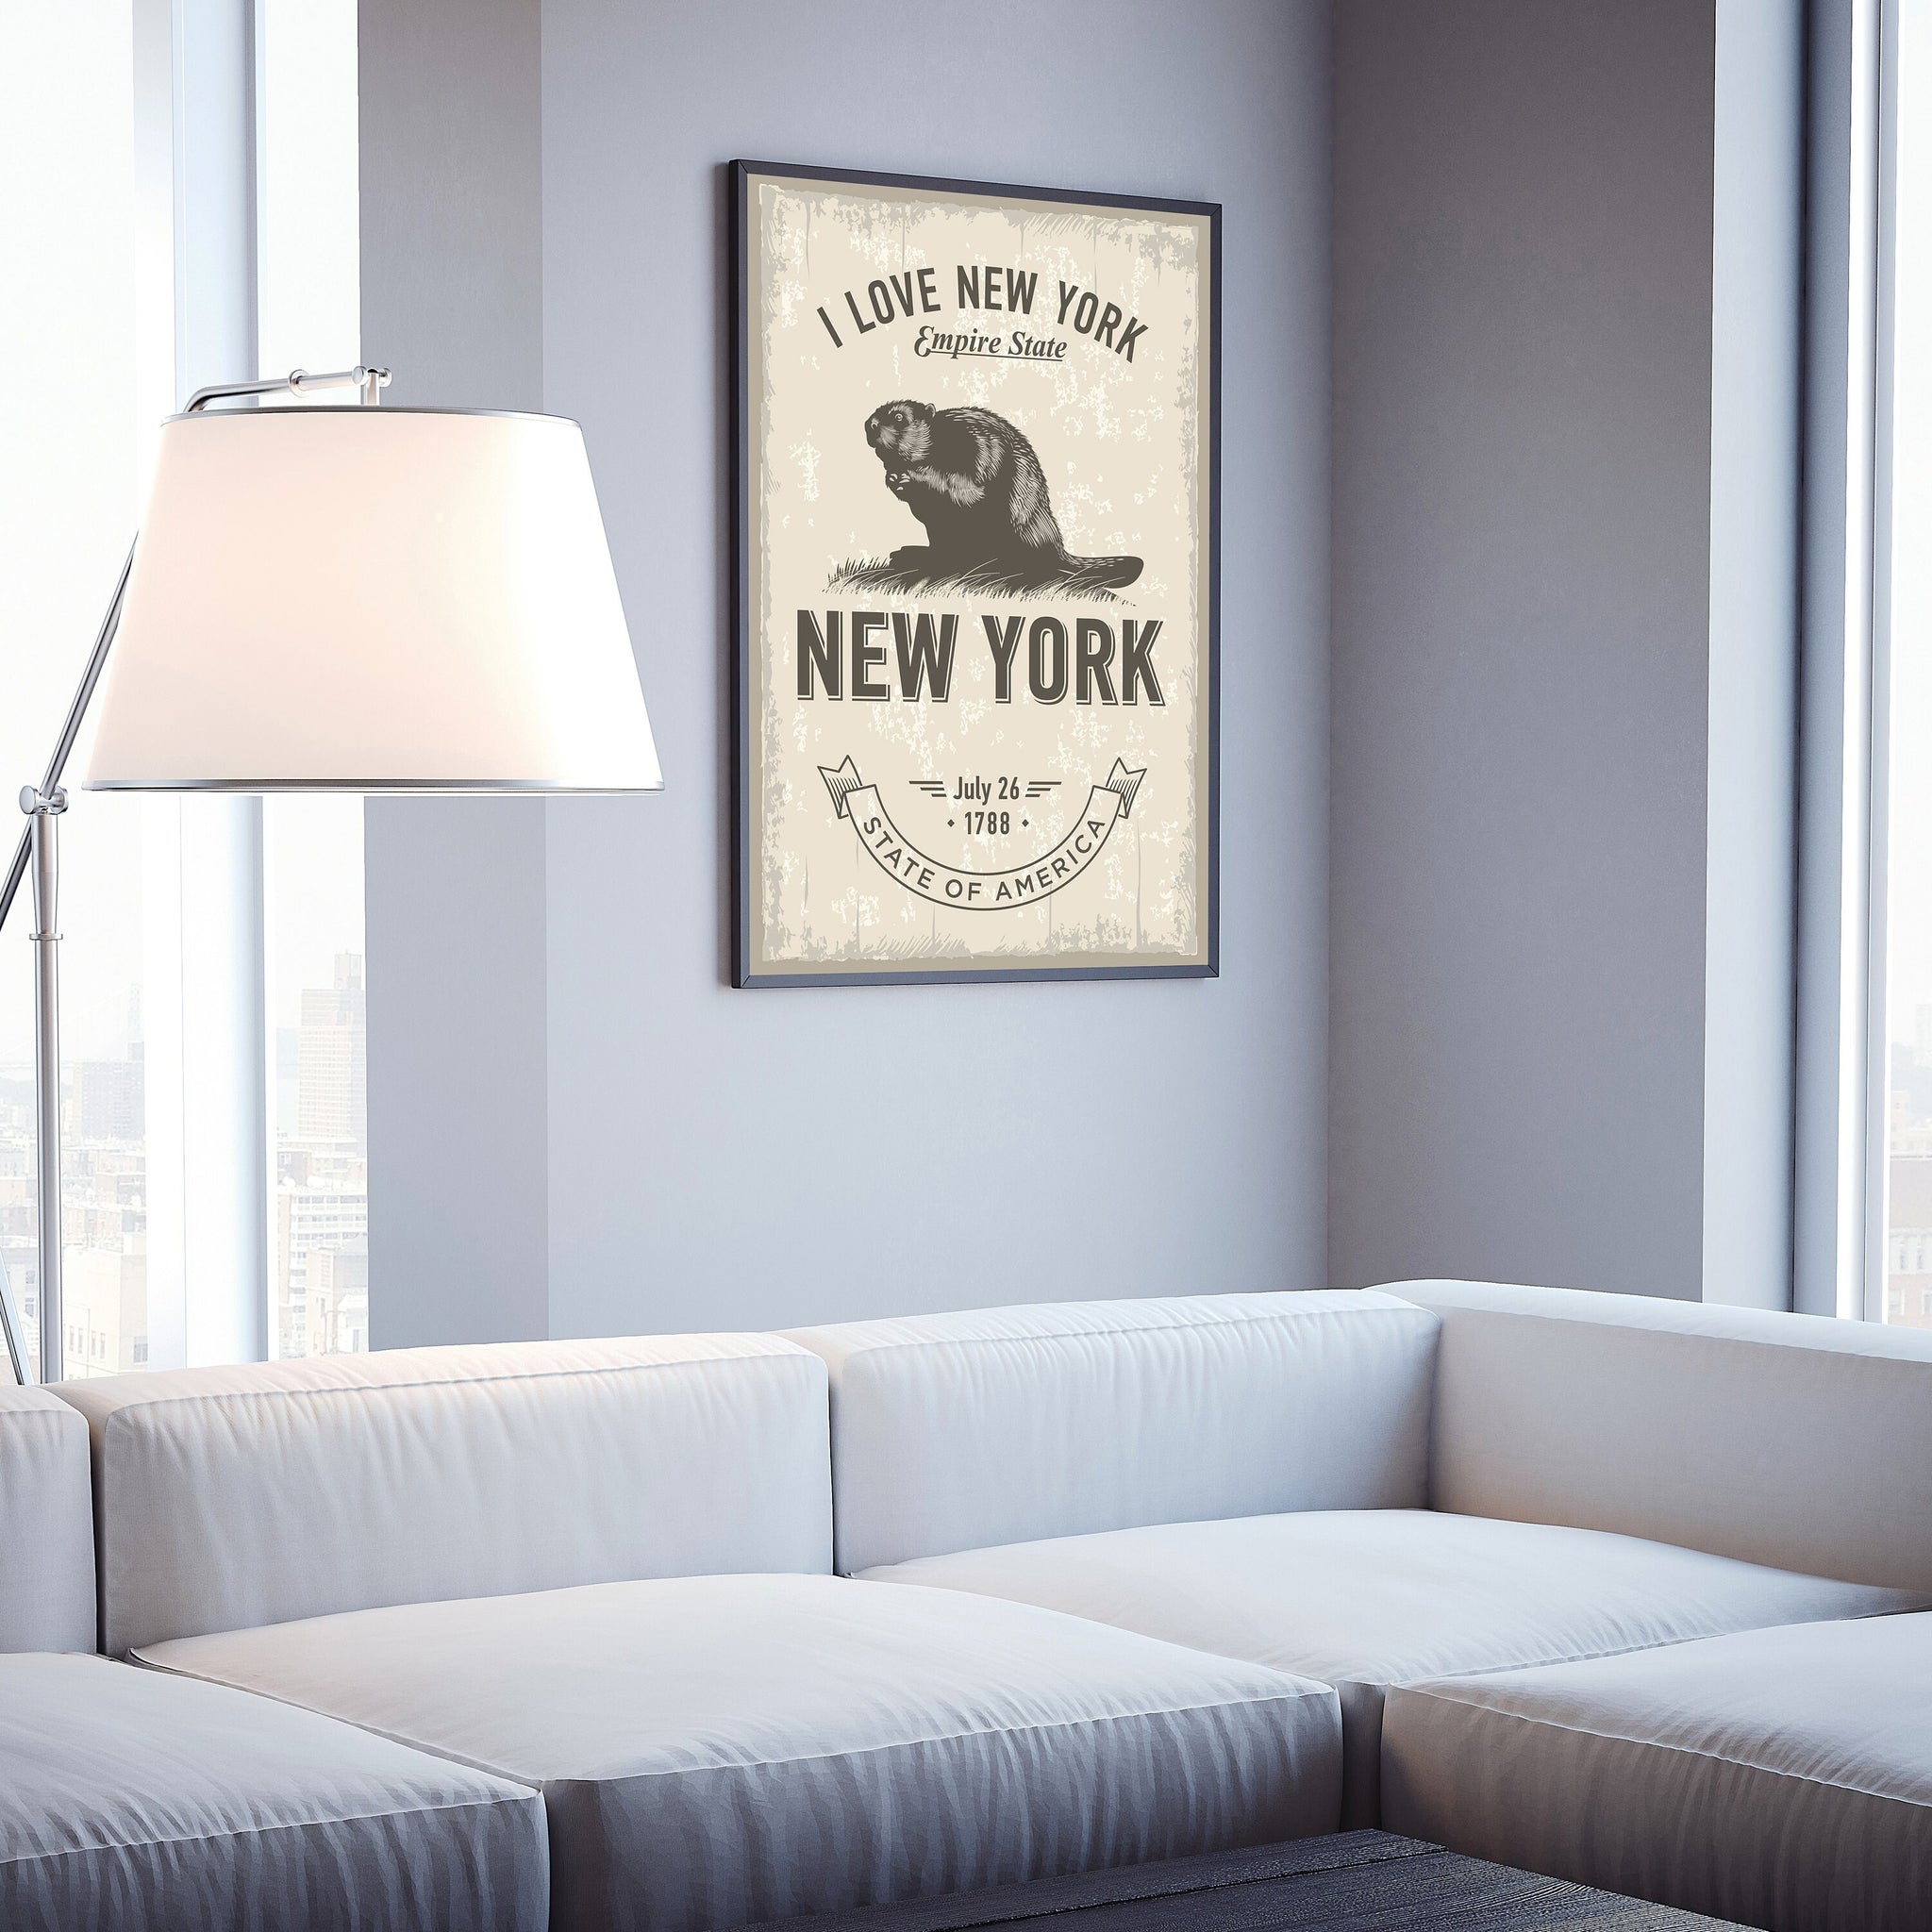 New York State Symbol Poster, New York State Poster Print, New York State Emblem Poster, Retro Travel State Poster, Home and Office Wall Art